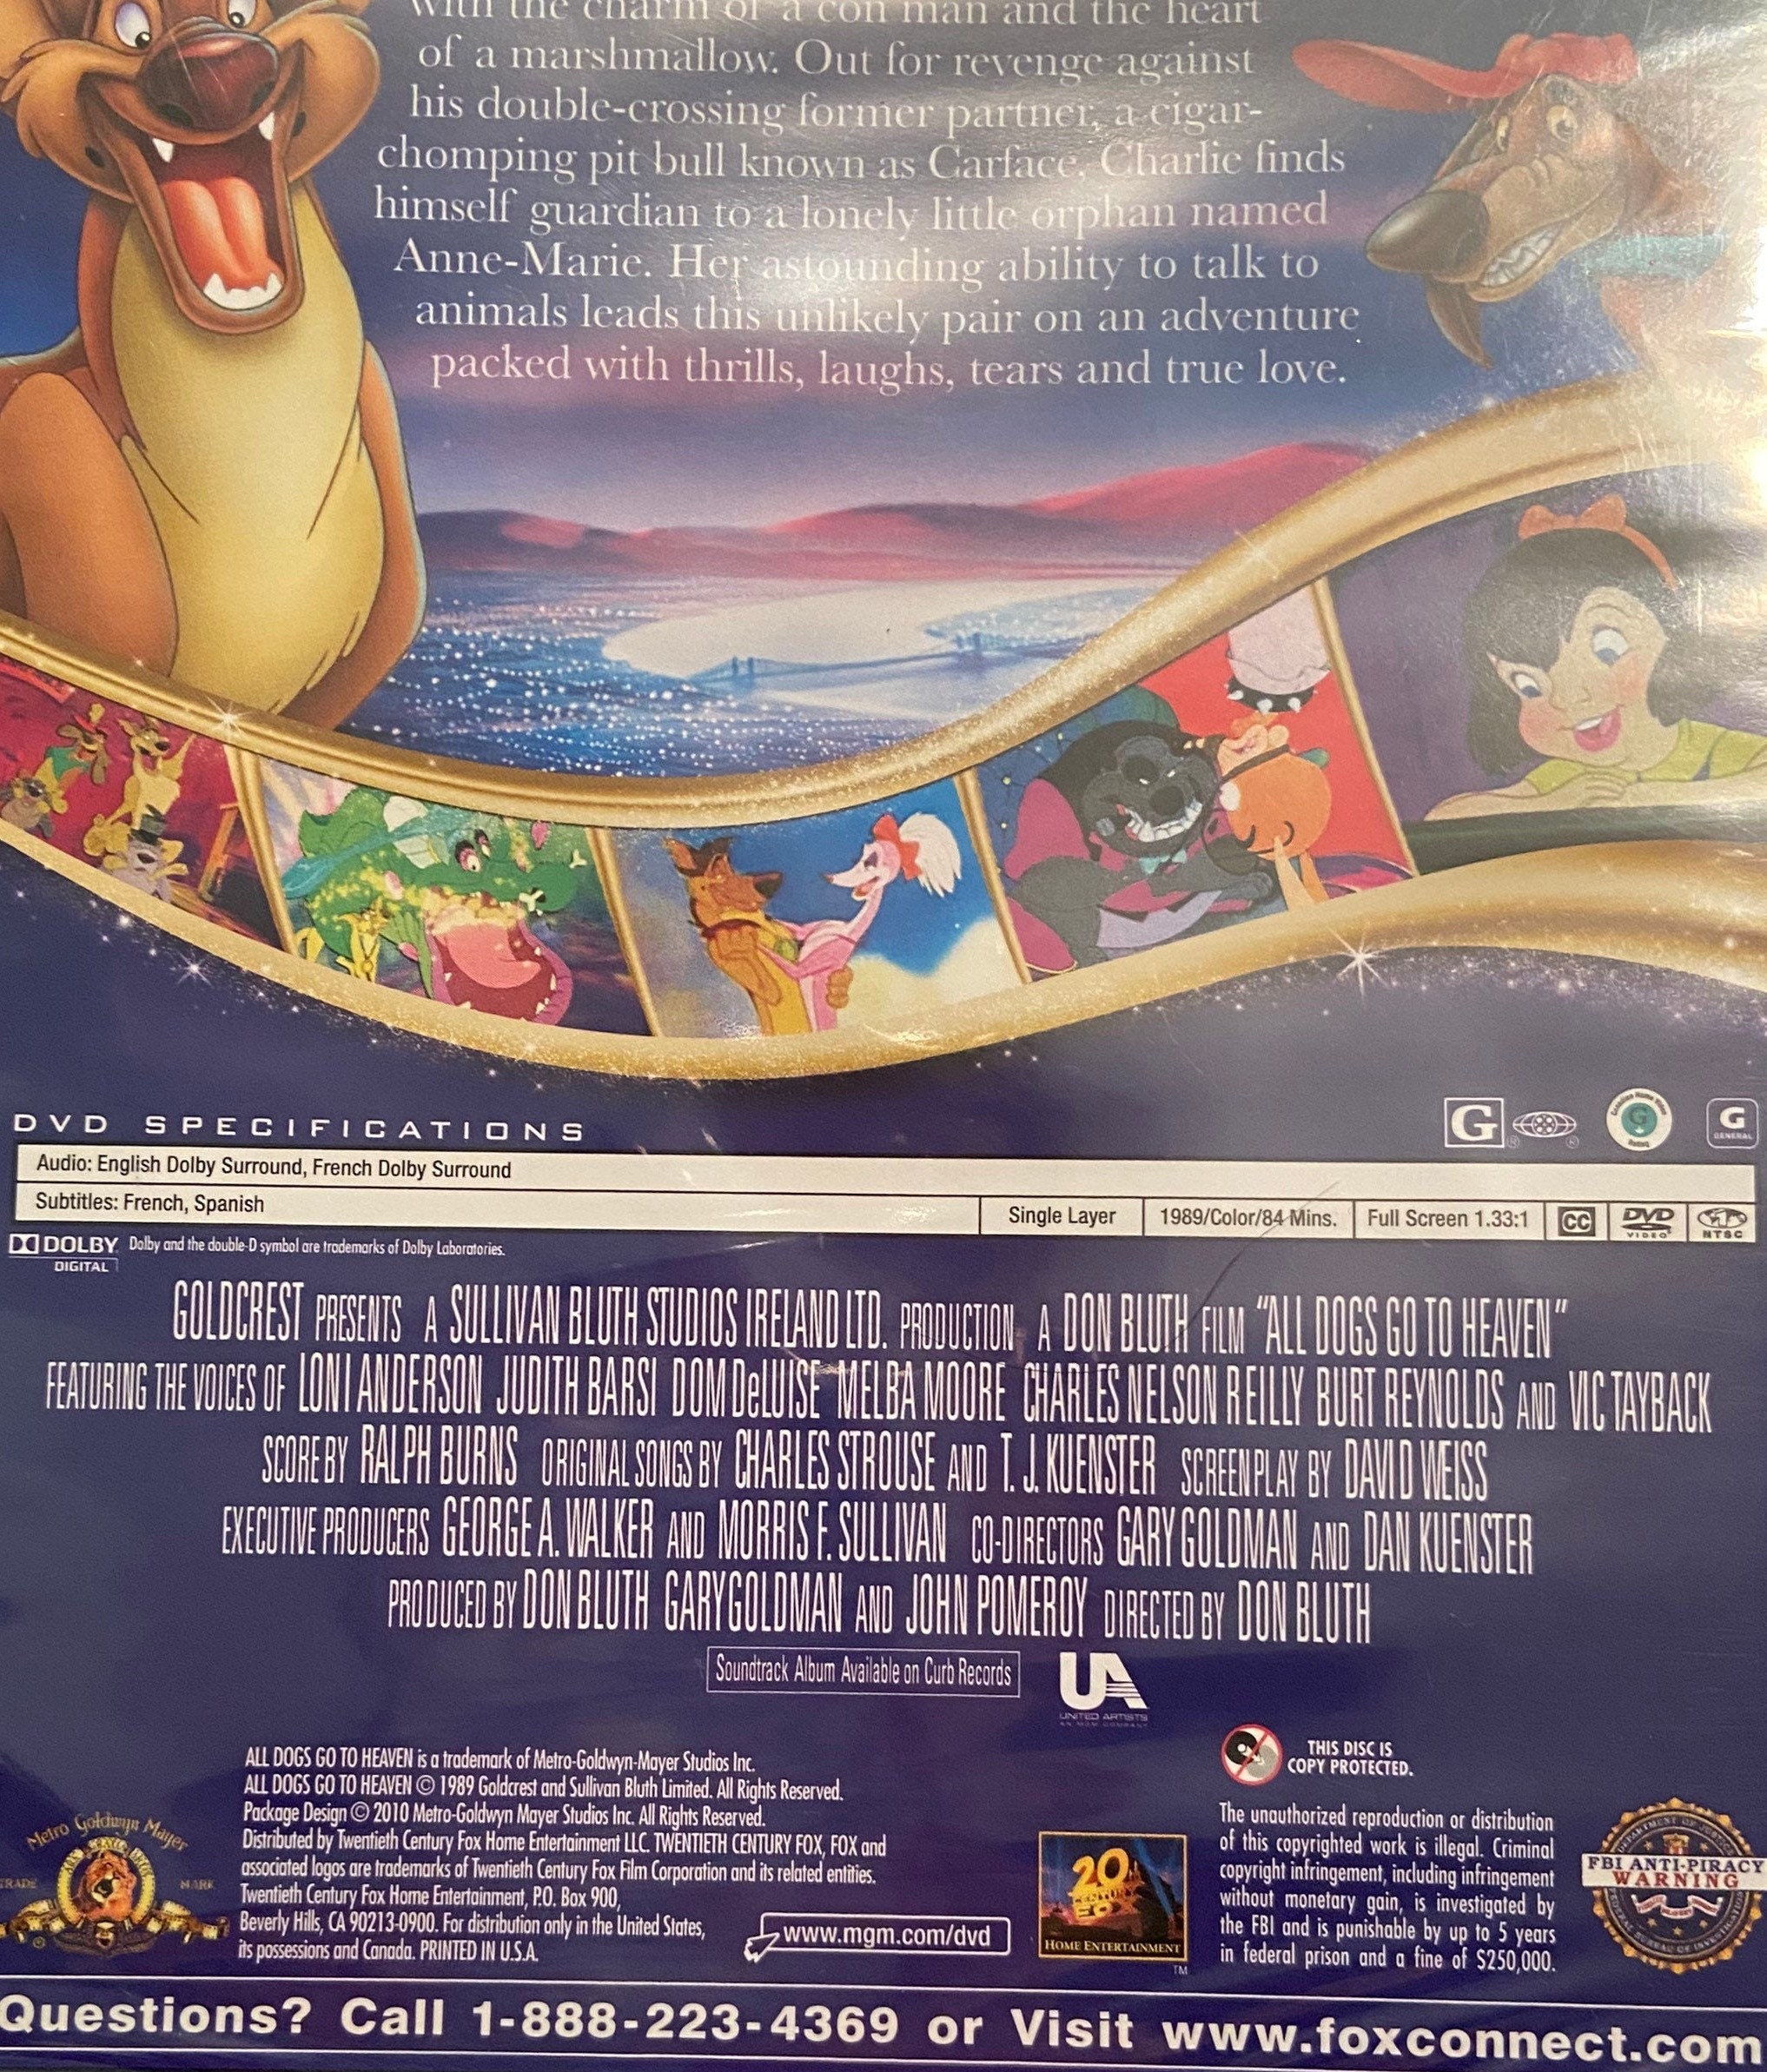 All Dogs Go To Heaven DVD 2010 MGM 20th Century Fox Film New Animated Movie